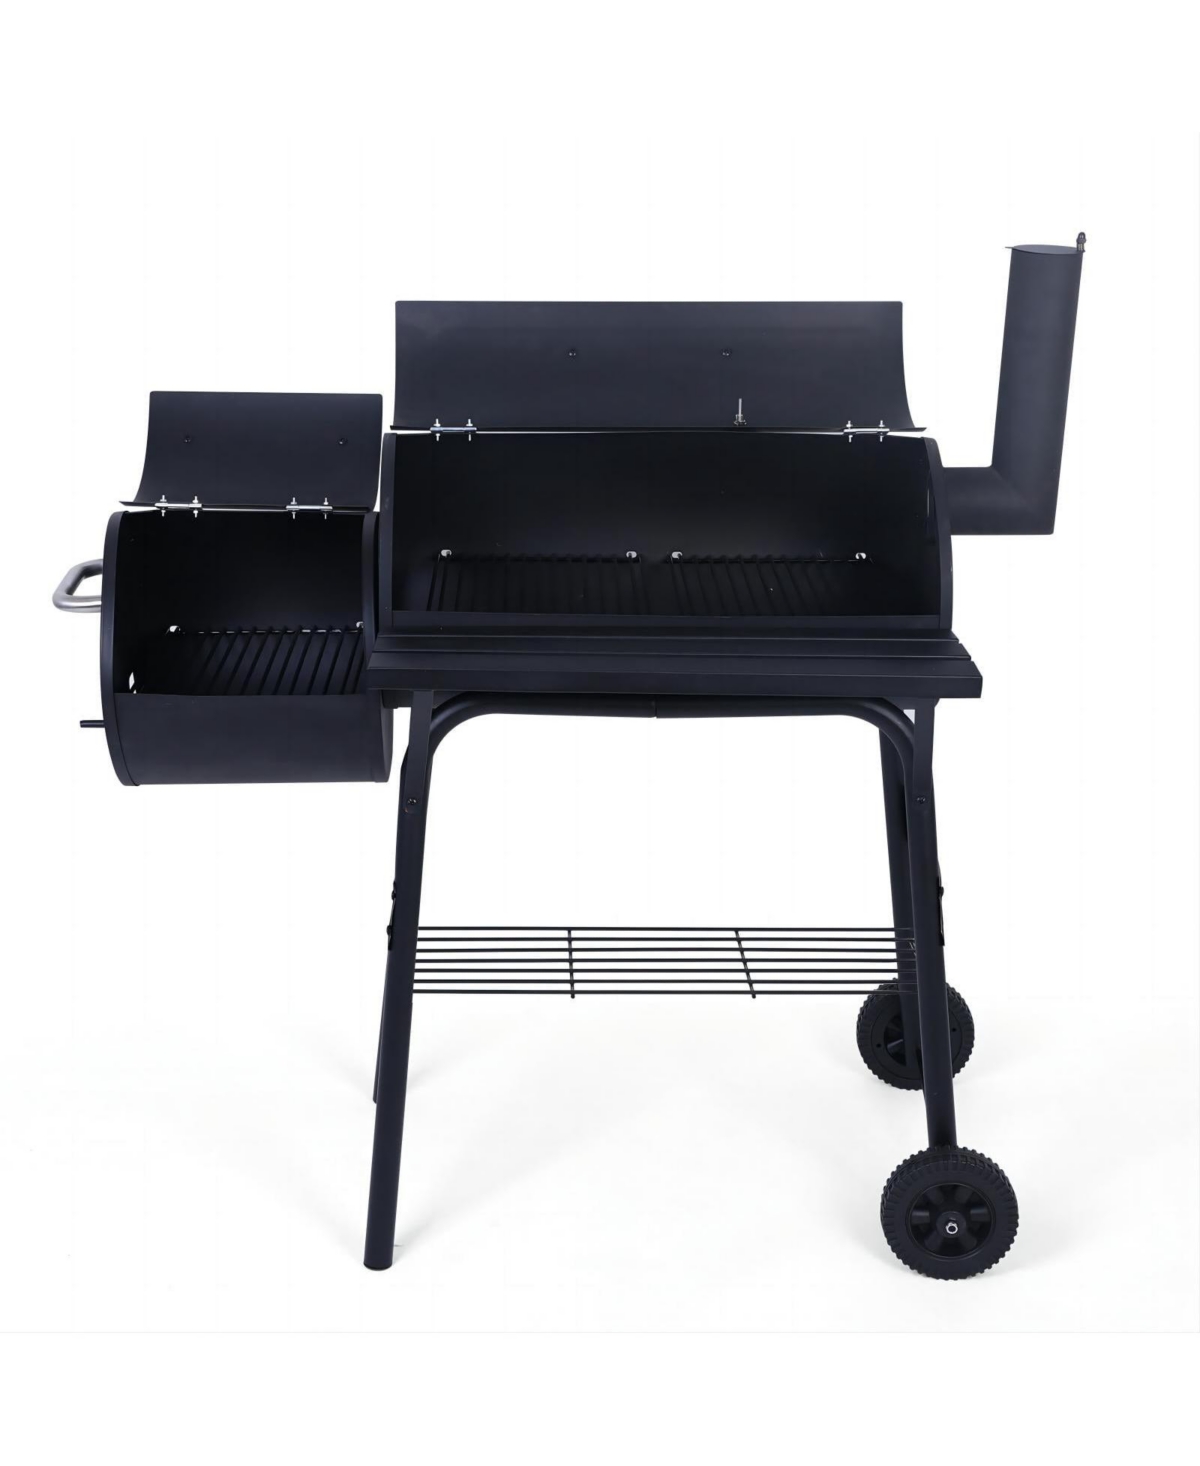 Outdoor Portable Bbq Charcoal Grill with Offset Smoker - Black